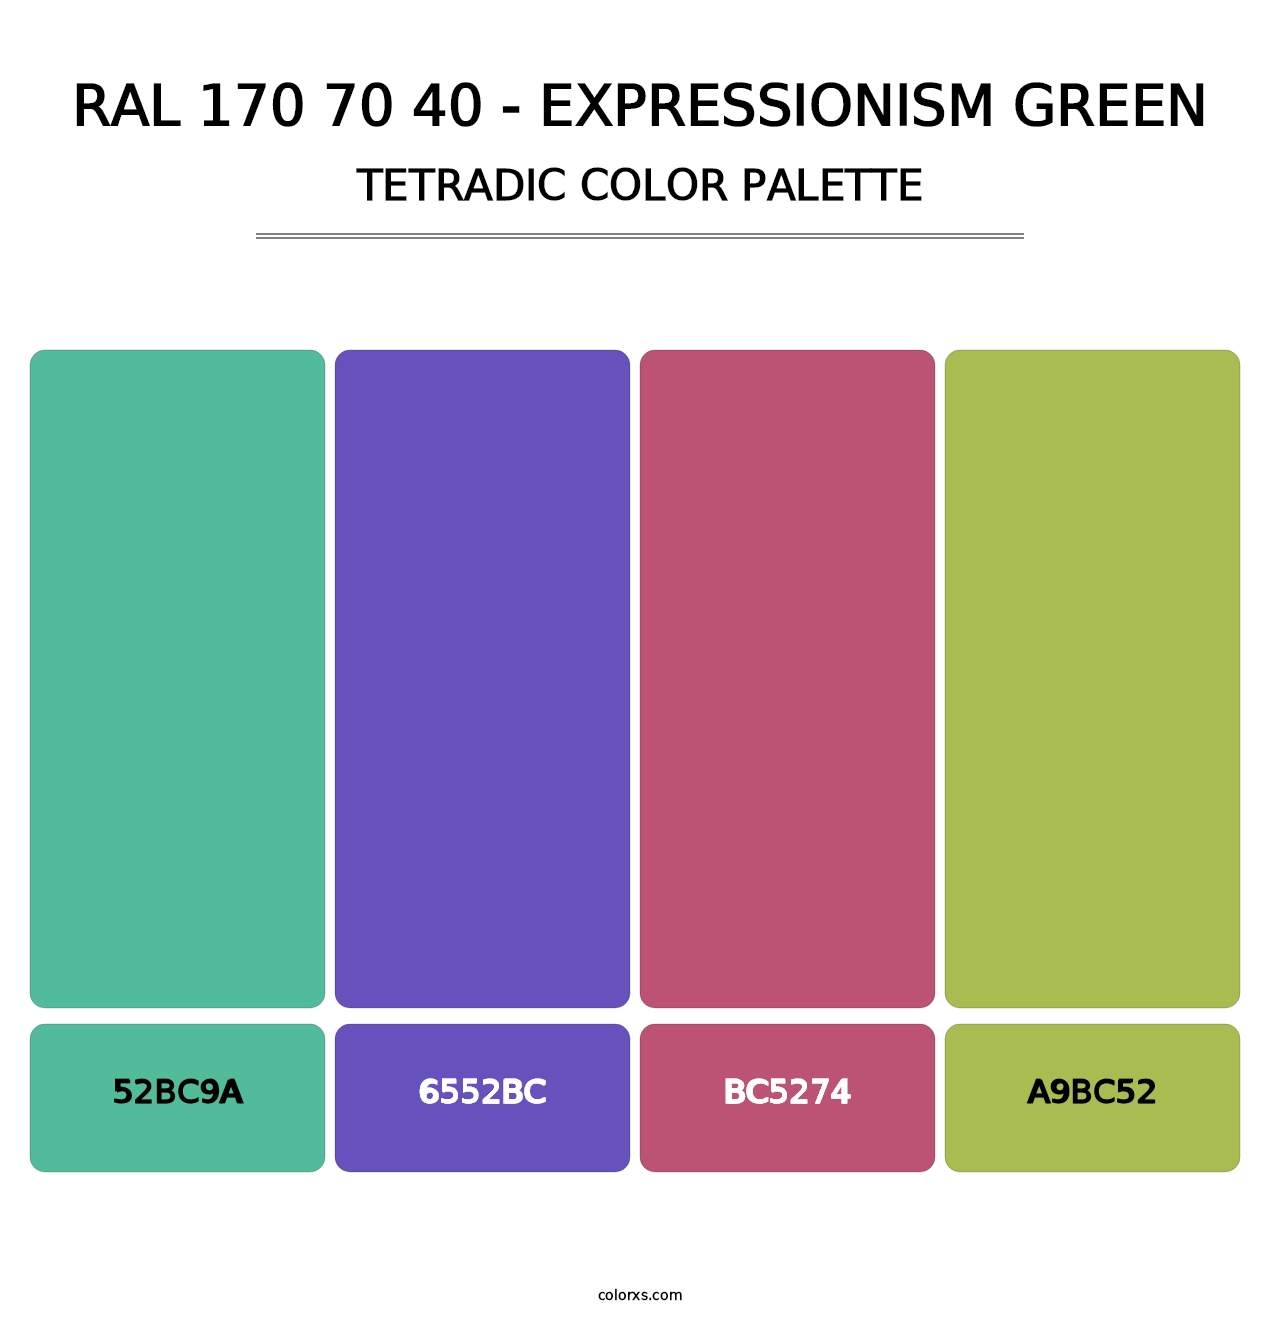 RAL 170 70 40 - Expressionism Green - Tetradic Color Palette